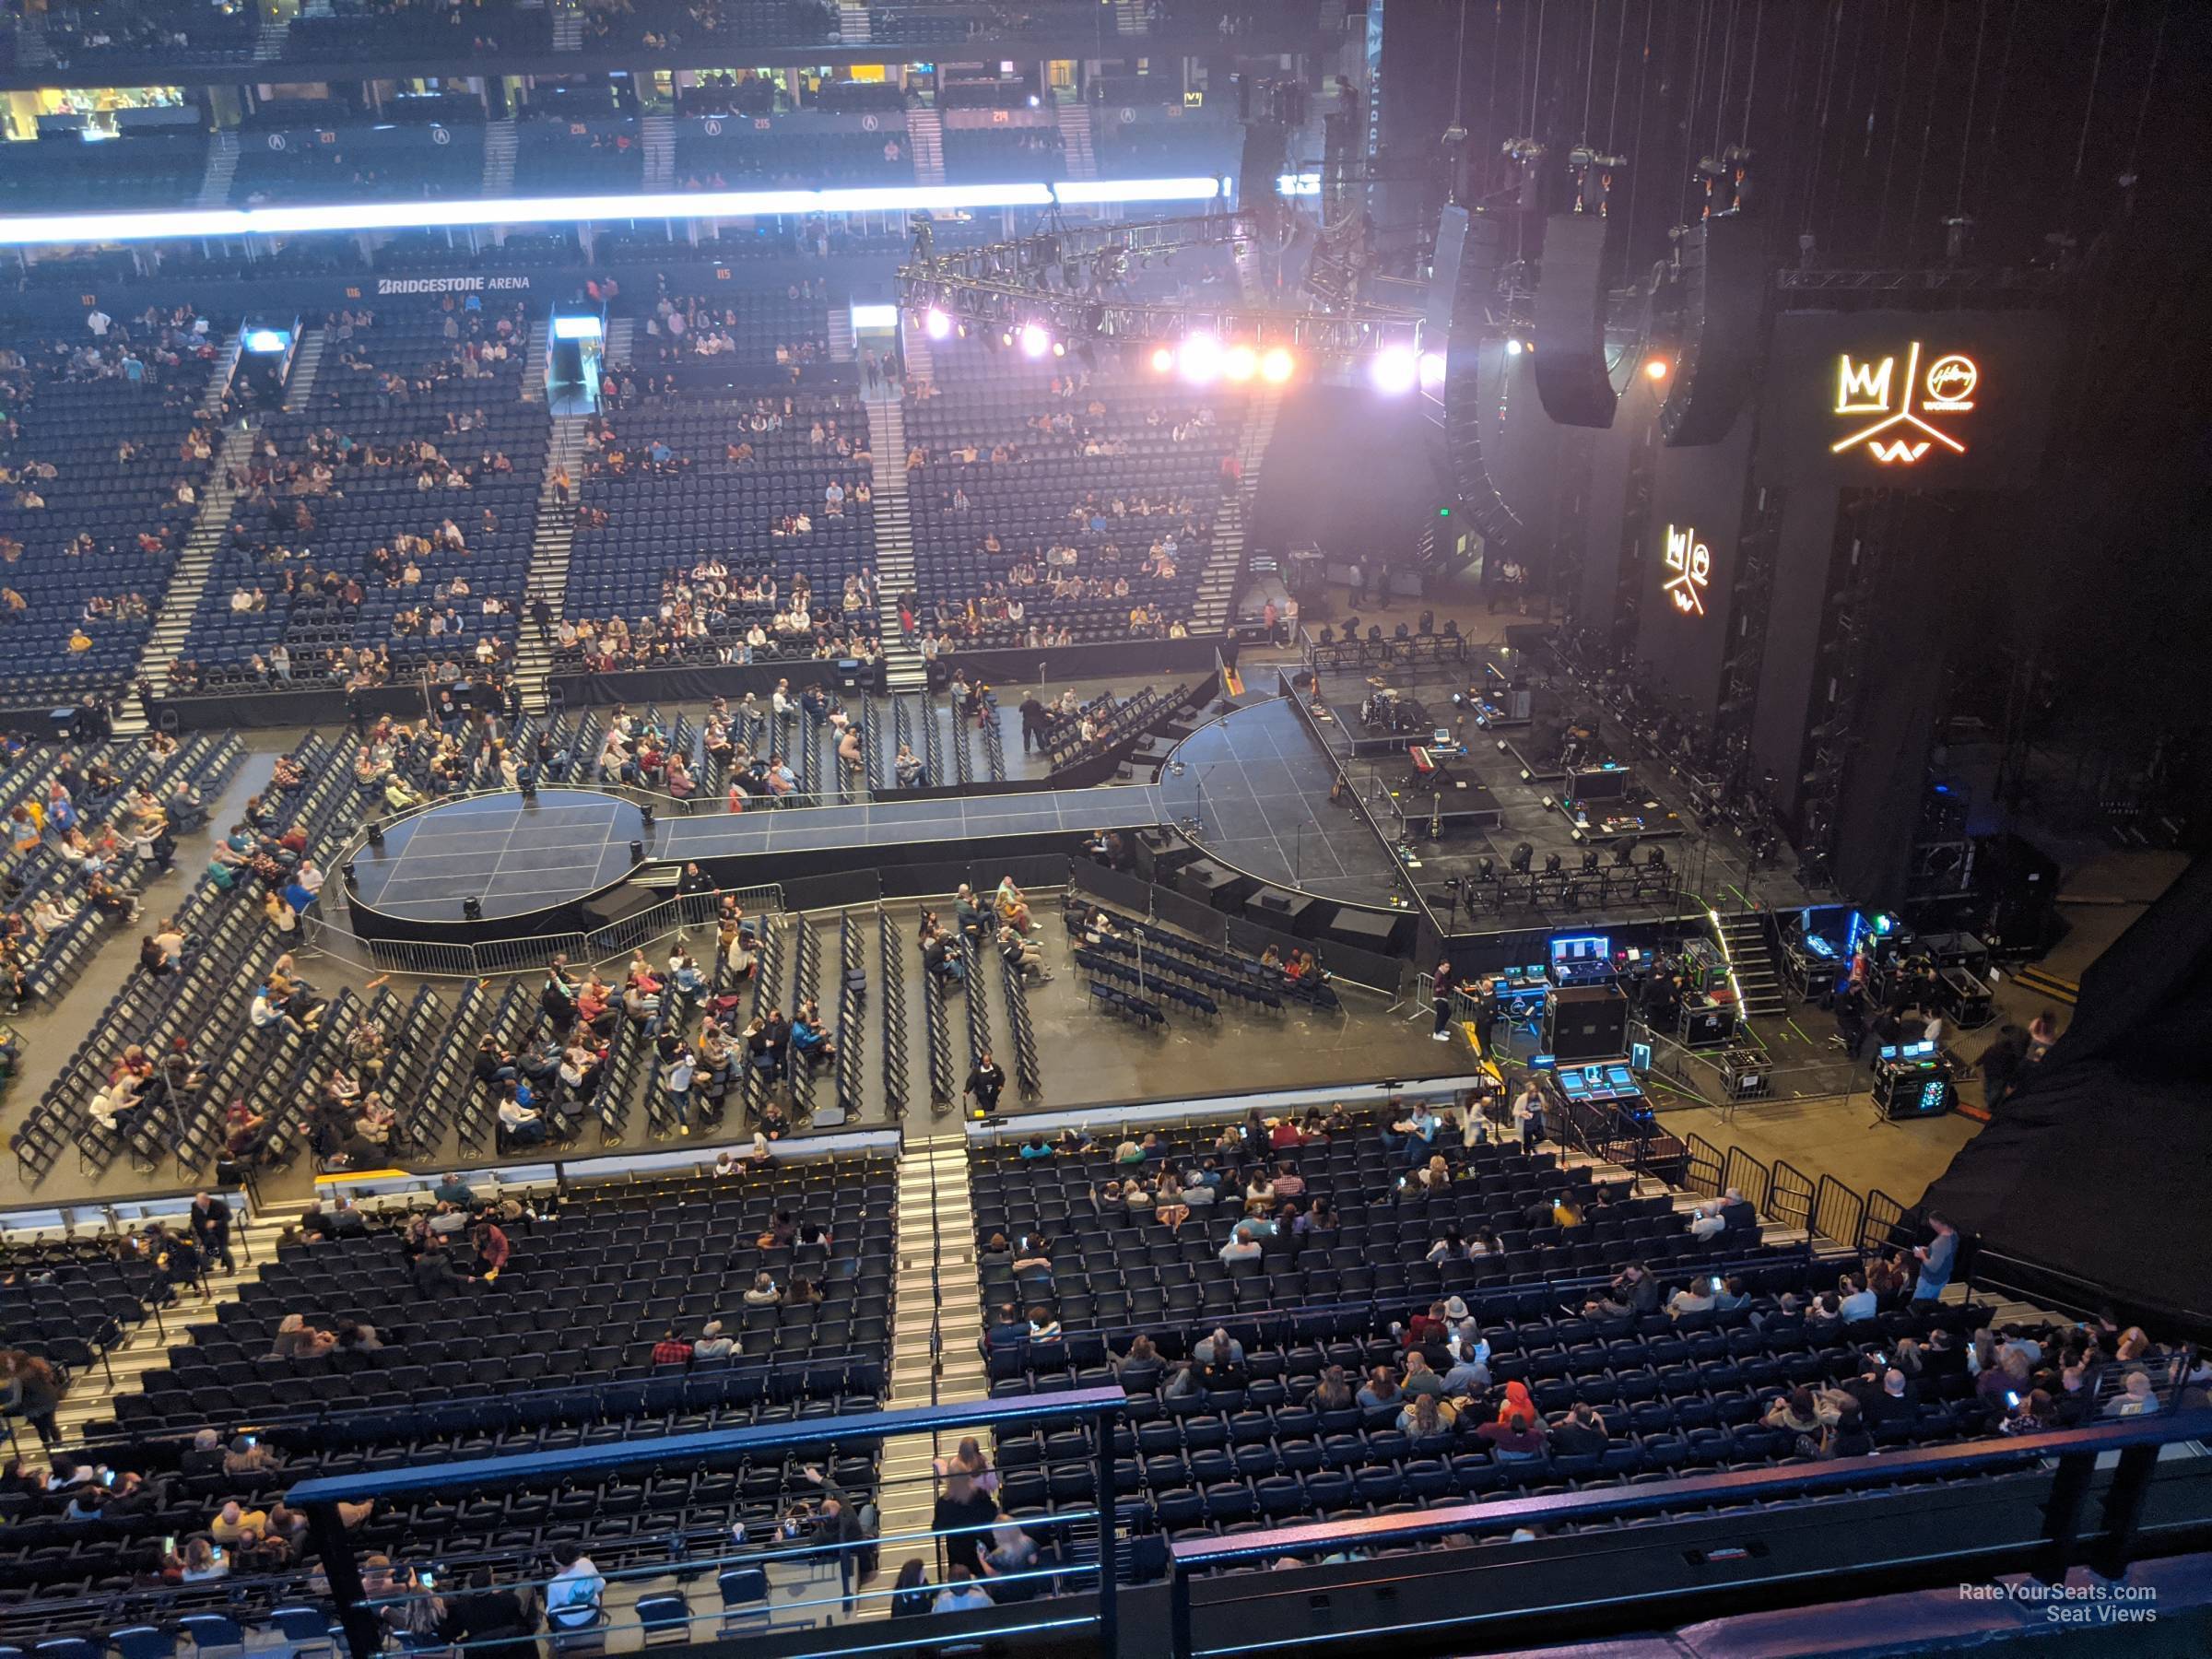 Section 311 at Bridgestone Arena for Concerts